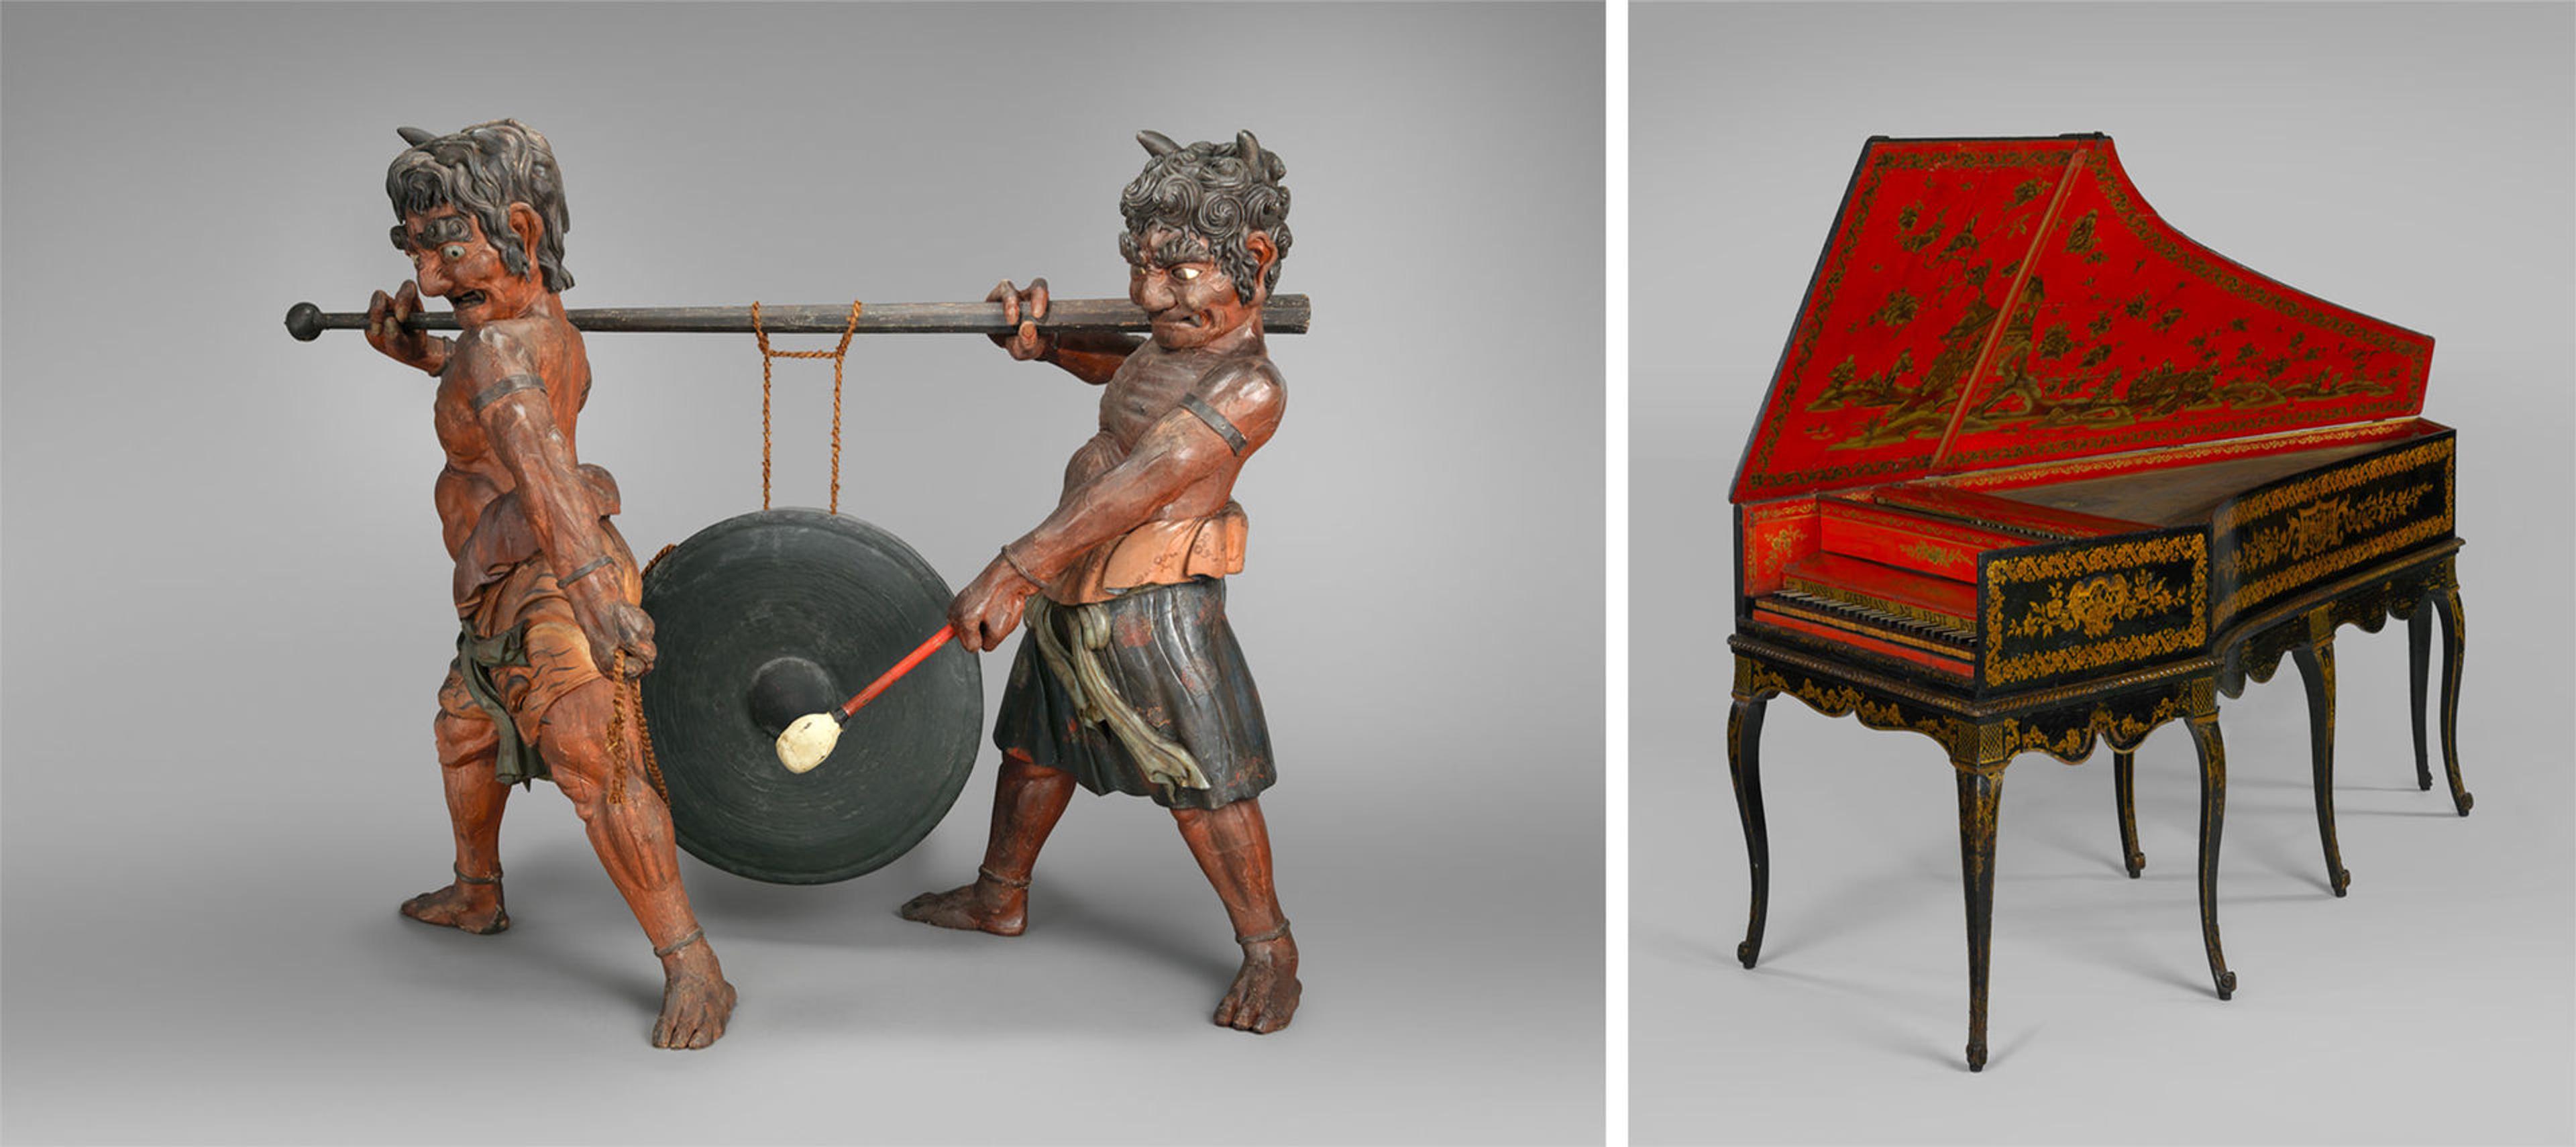 Left: Gong Held by Oni, early 19th century. Right: Jean Goermans's Harpsichord converted to a piano, 1754